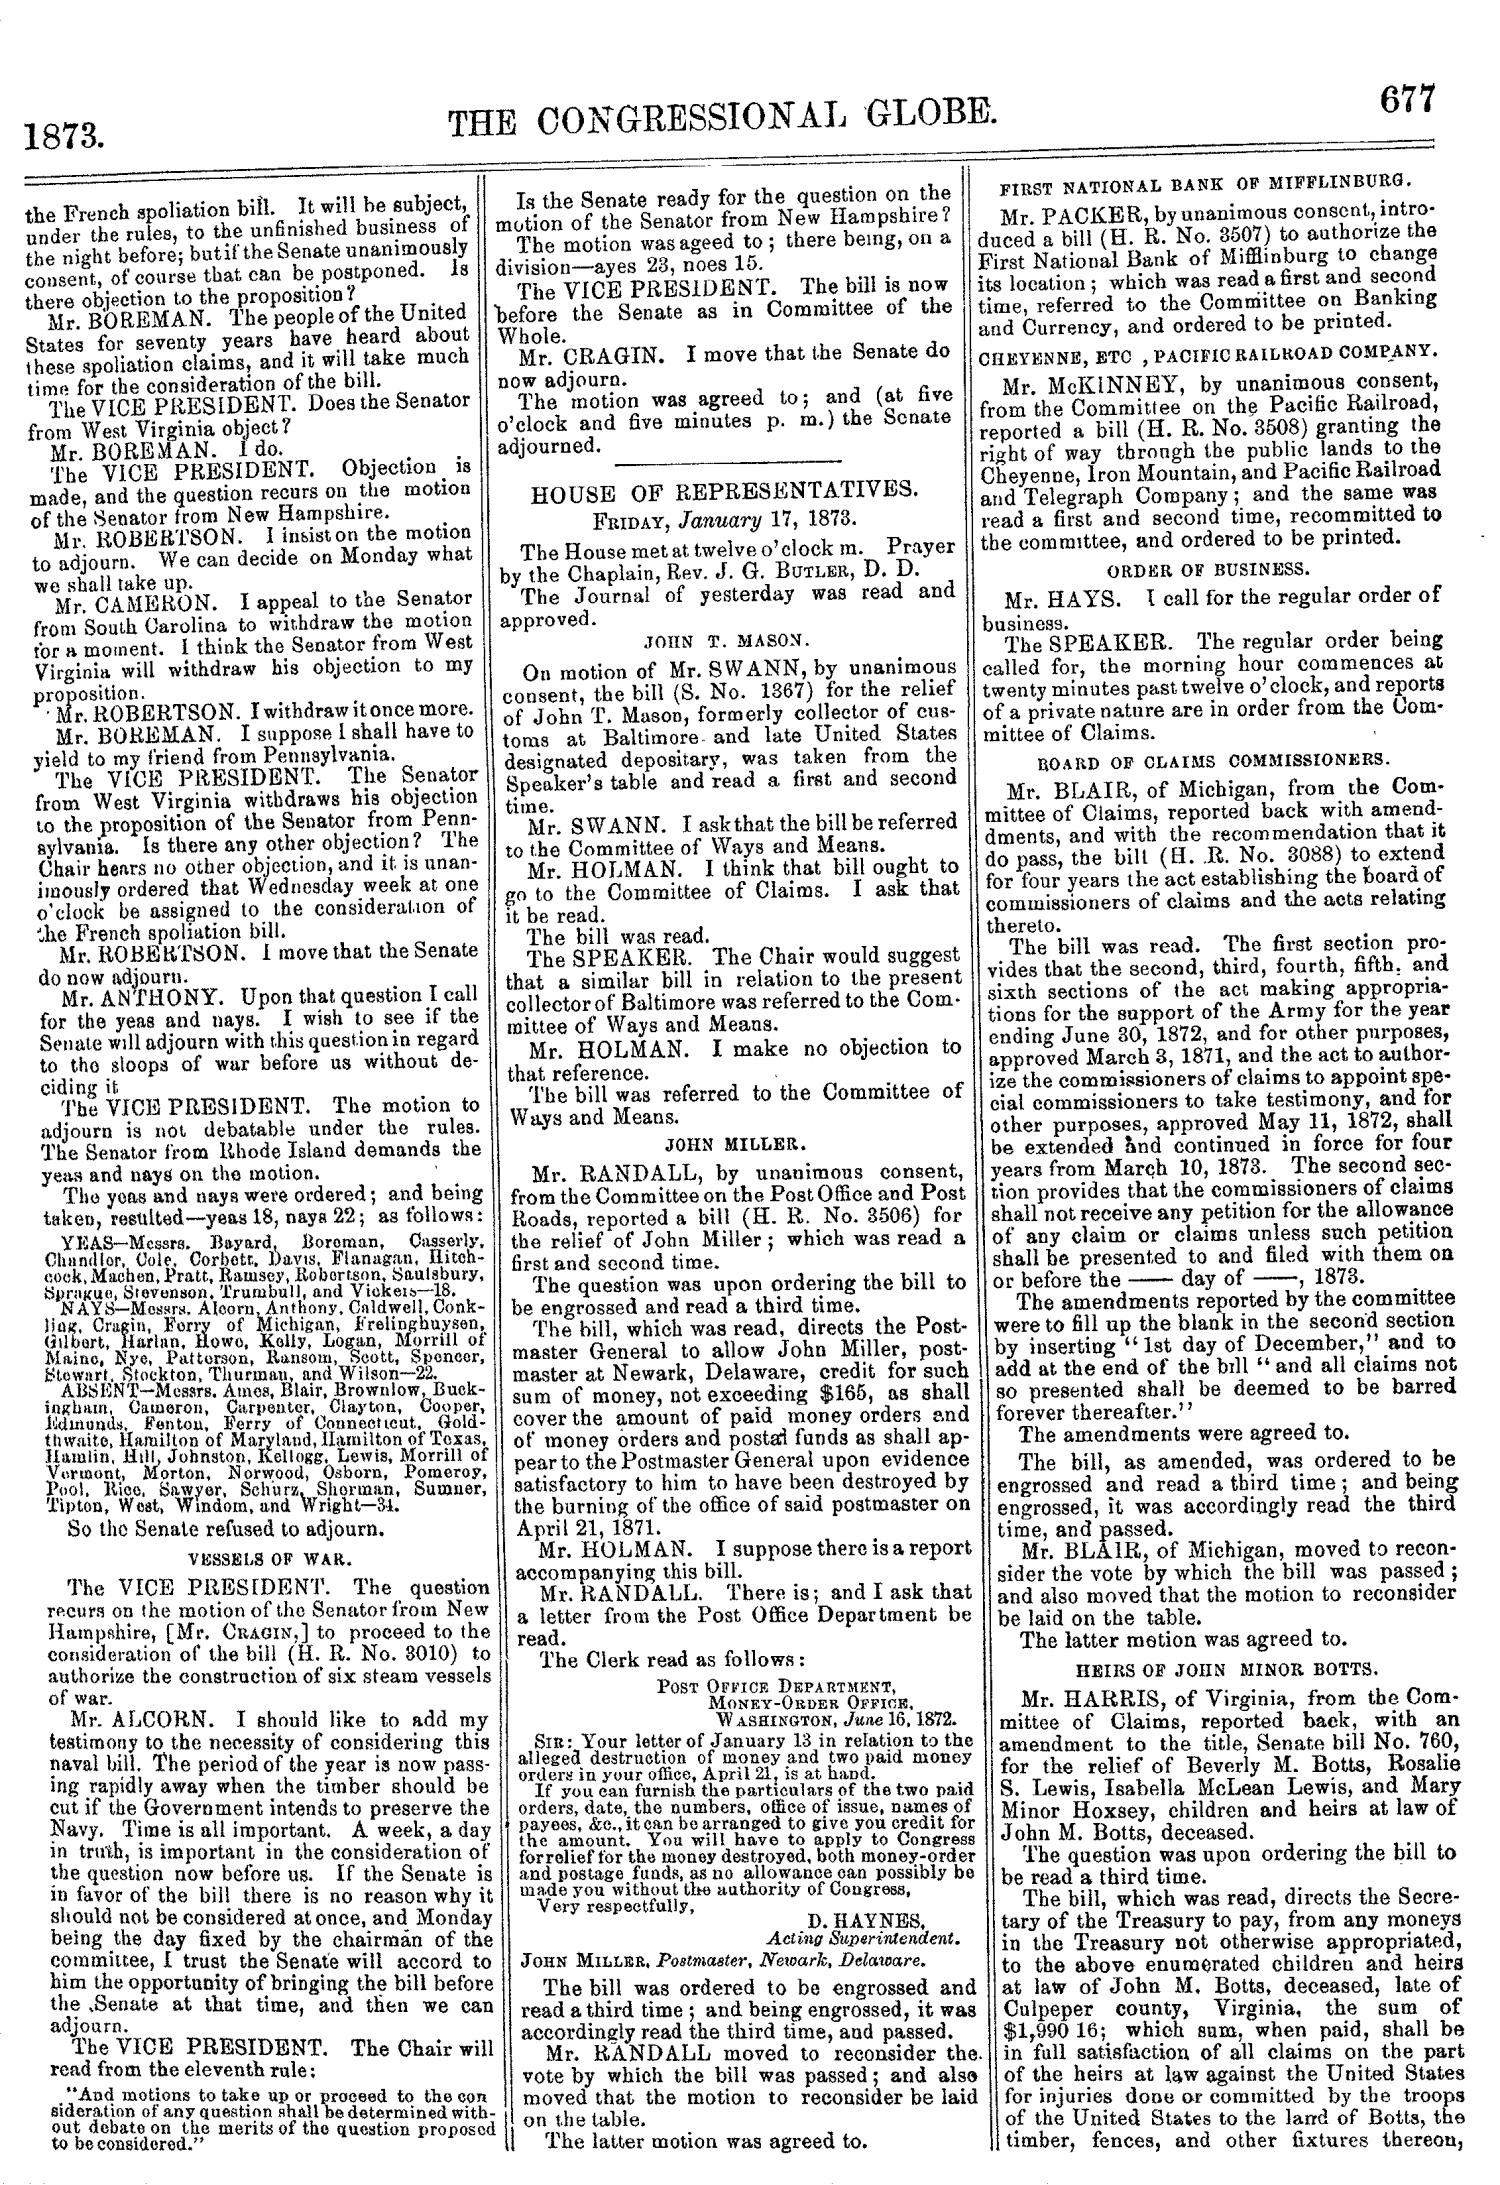 The Congressional Globe: Containing the Debates and Proceedings of the Third Session Forty-Second Congress; An Appendix, Embracing the Laws Passed at That Session
                                                
                                                    677
                                                